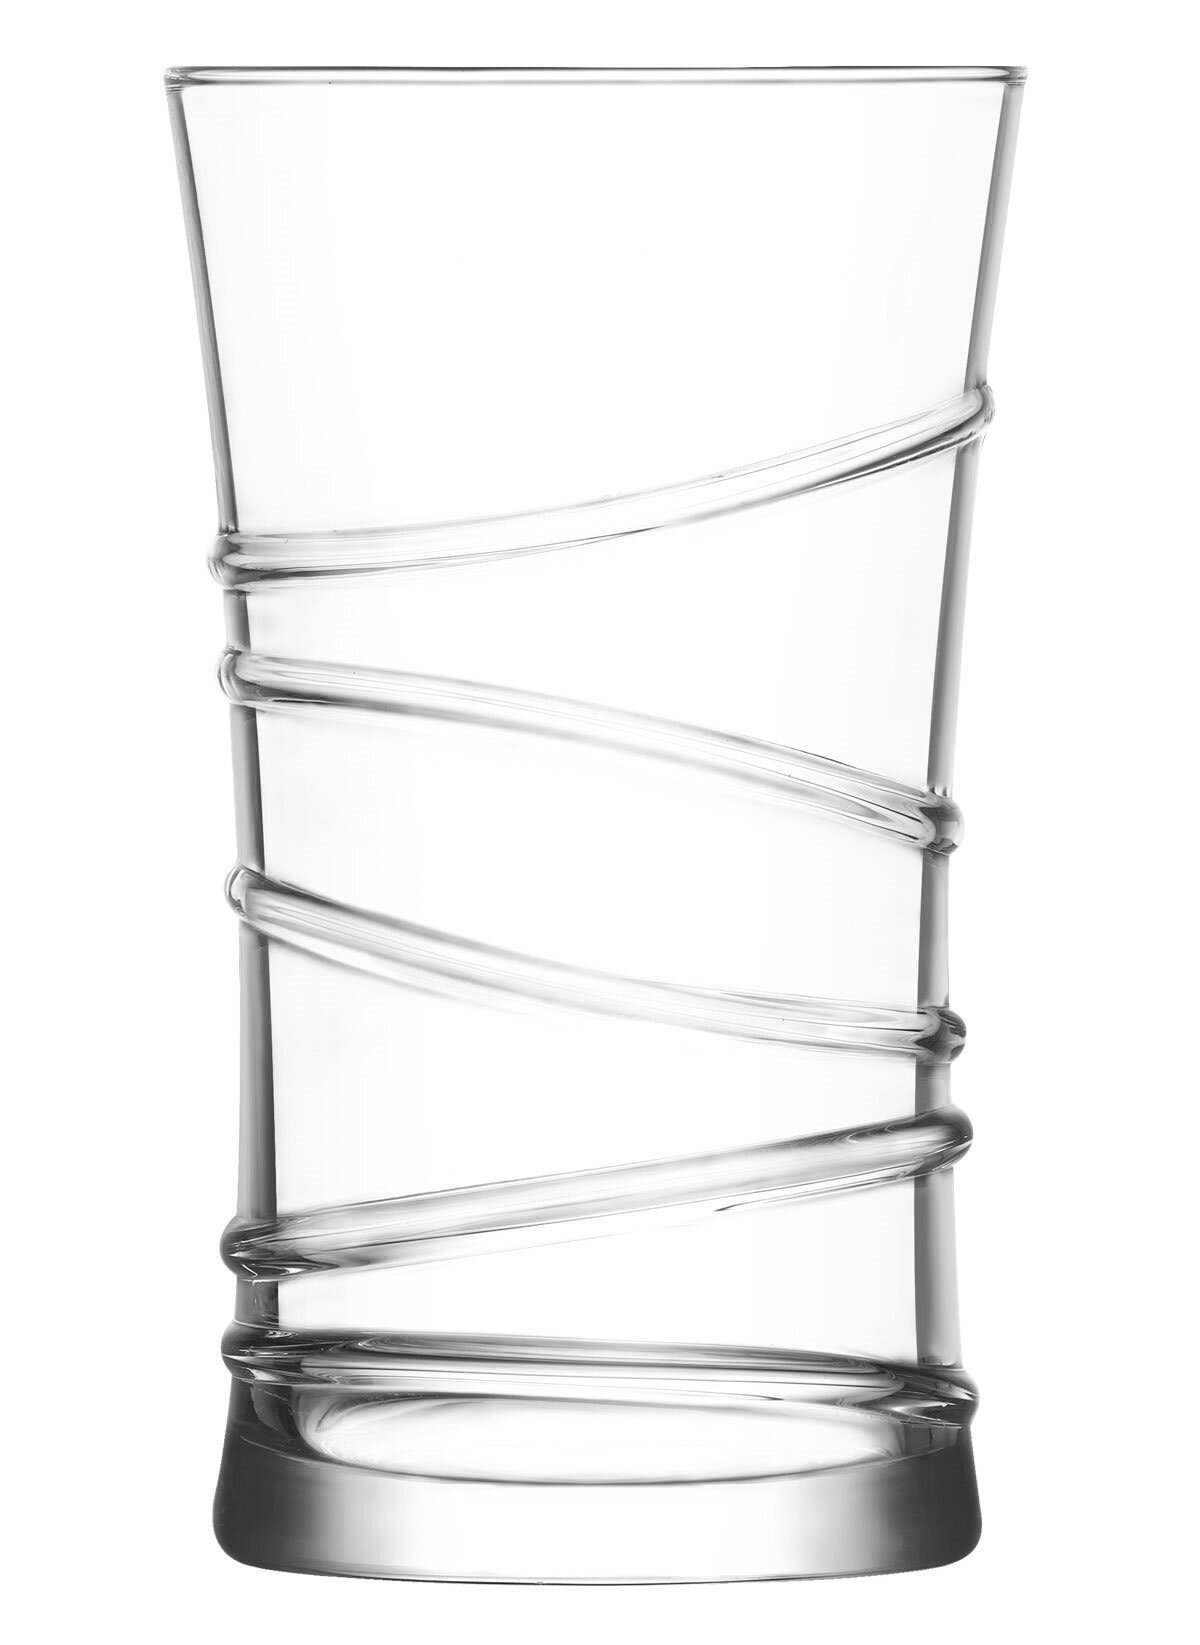 Hakan - Highball Glass Set of 6, Tall Drinking Glasses for Beverages -  Especially Kitchens